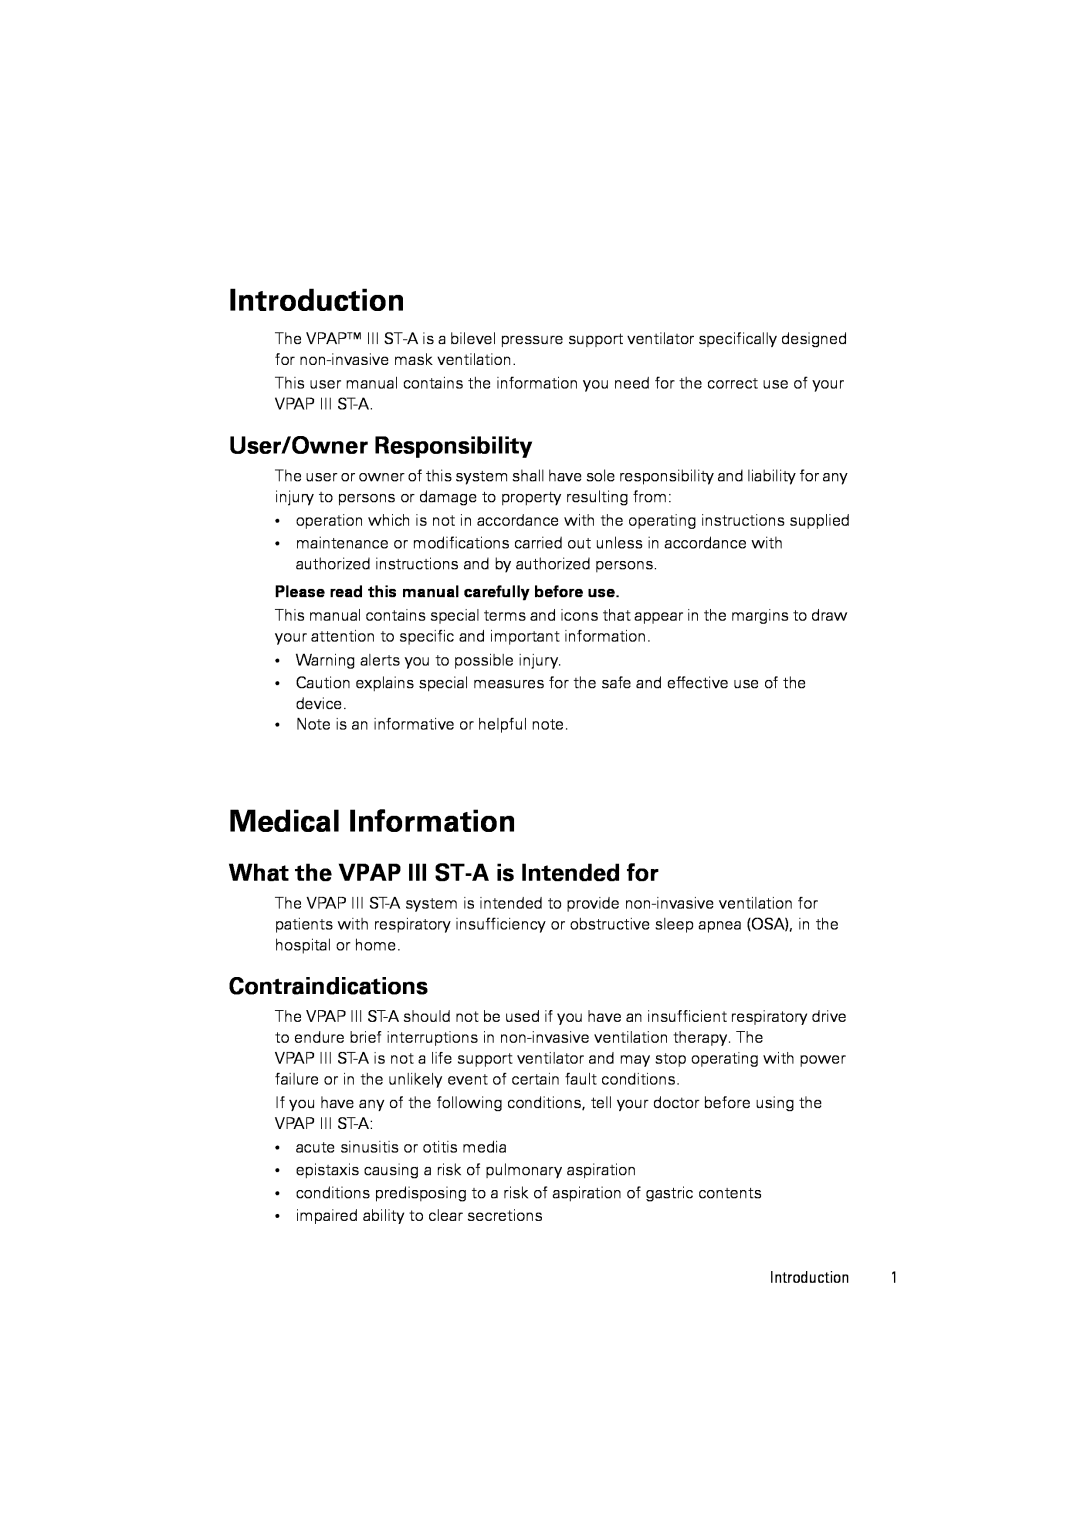 ResMed user manual Introduction, Medical Information, User/Owner Responsibility, What the VPAP III ST-Ais Intended for 